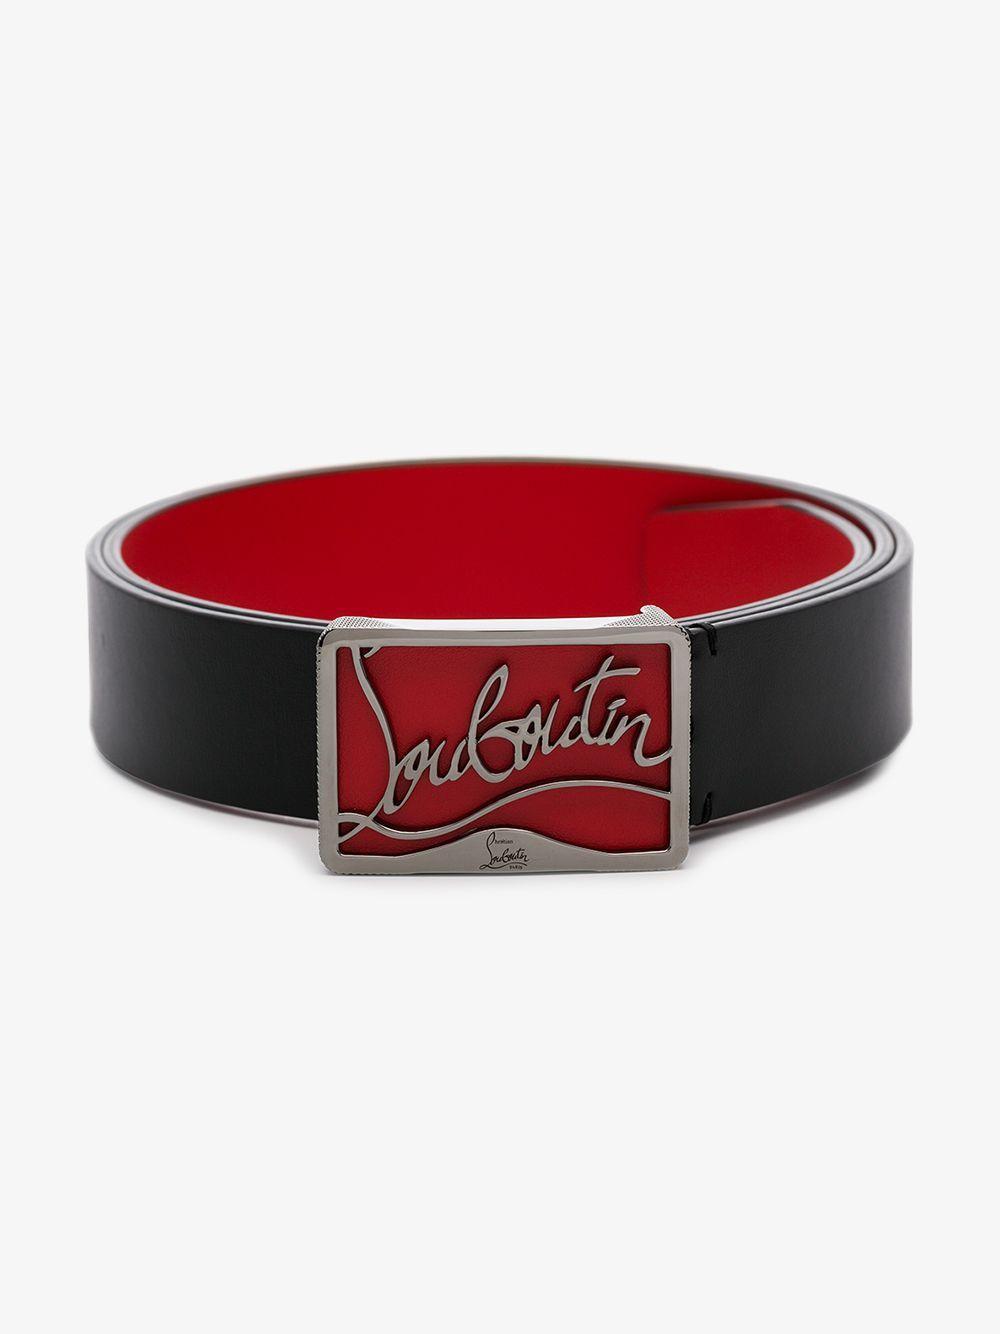 Christian Louboutin Ricky Logo-buckle Leather Belt in Black/Red 